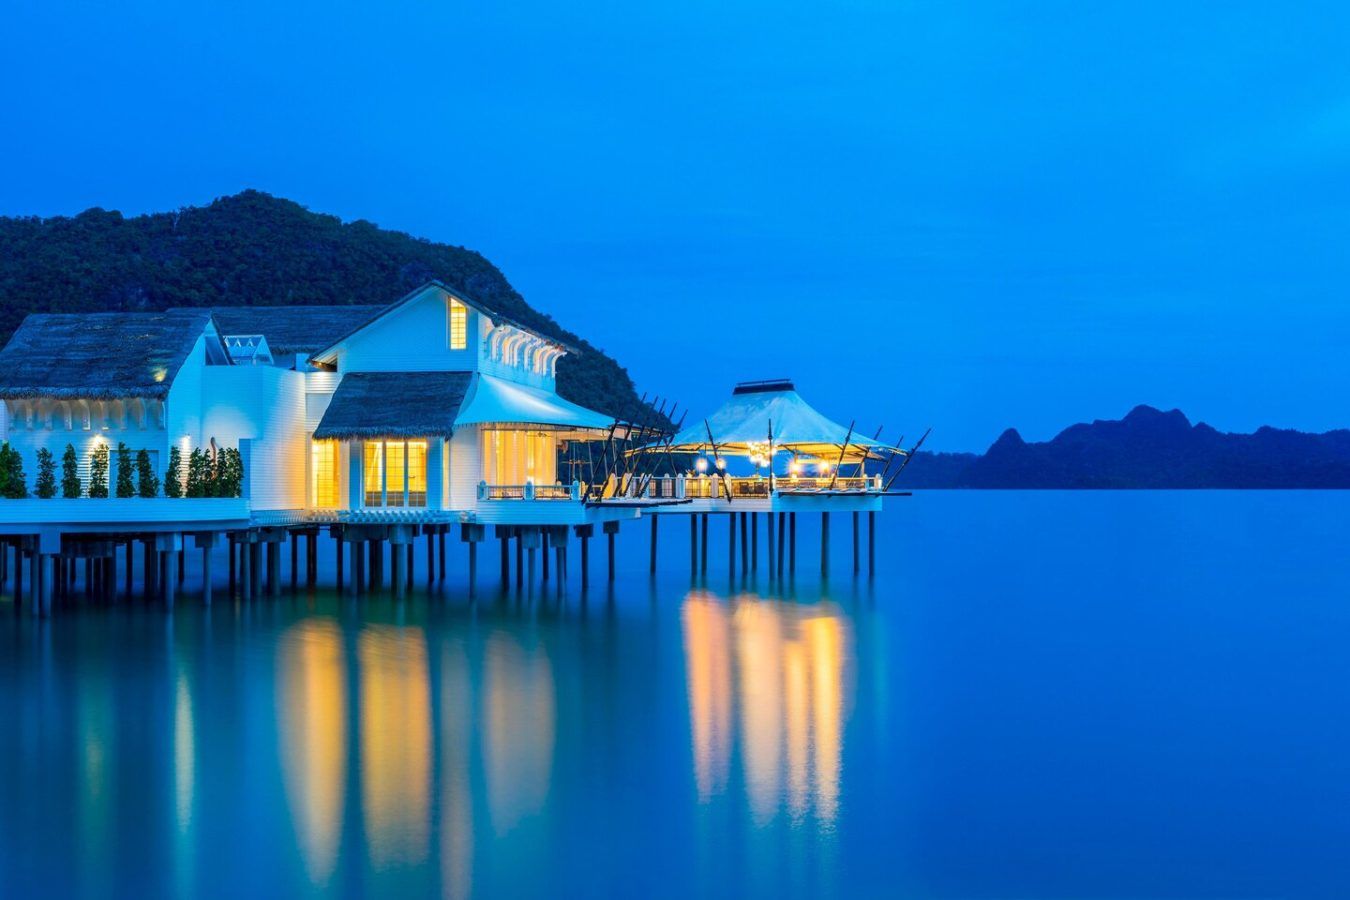 Marriott Bonvoy’s Top 52 Restaurants and Bars makes a final stop in The St. Regis Langkawi